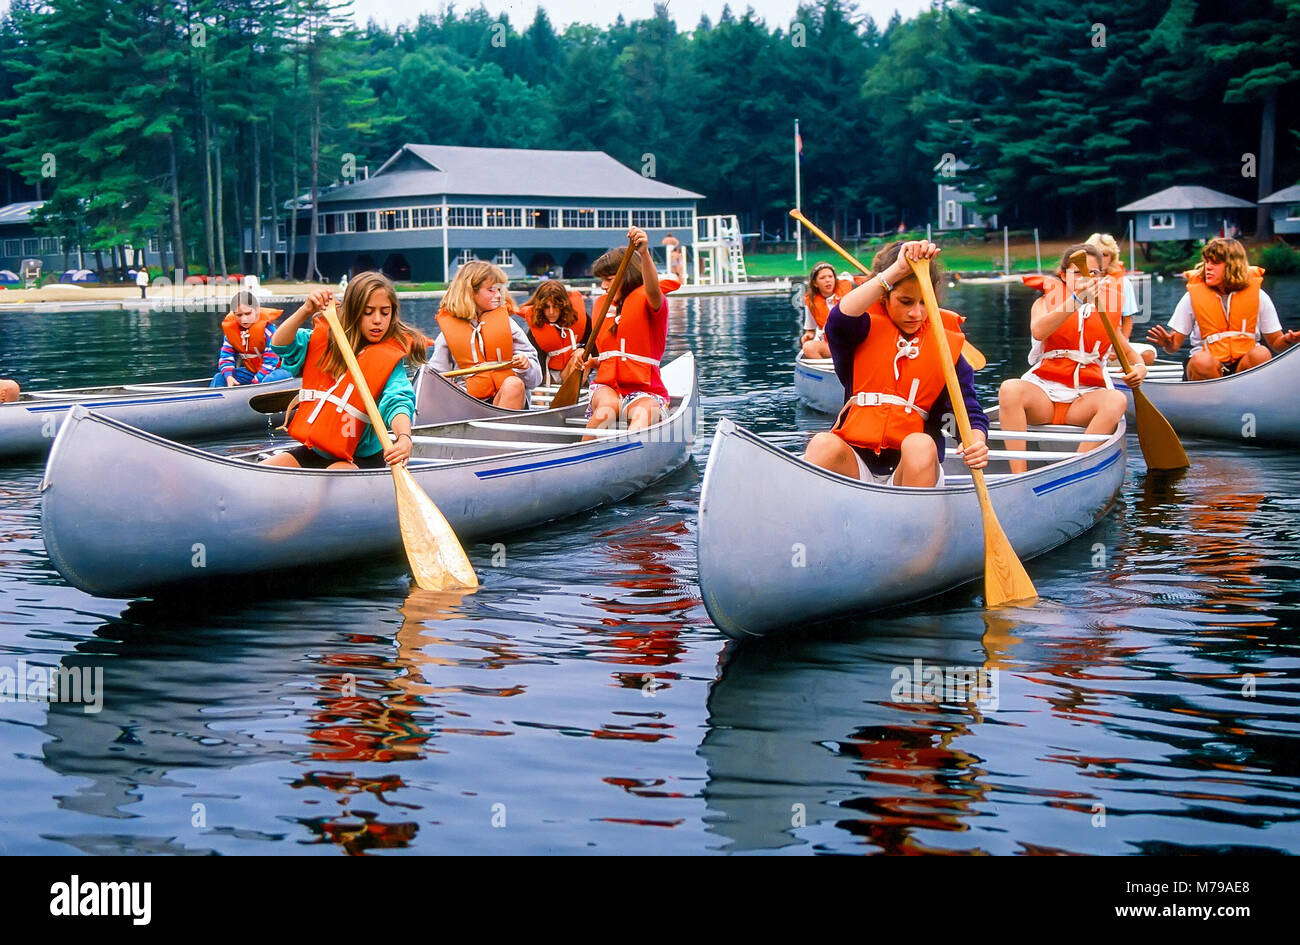 A large group of girls lean how to paddle canoes at summer camp in Vermont, United States, North America. Stock Photo